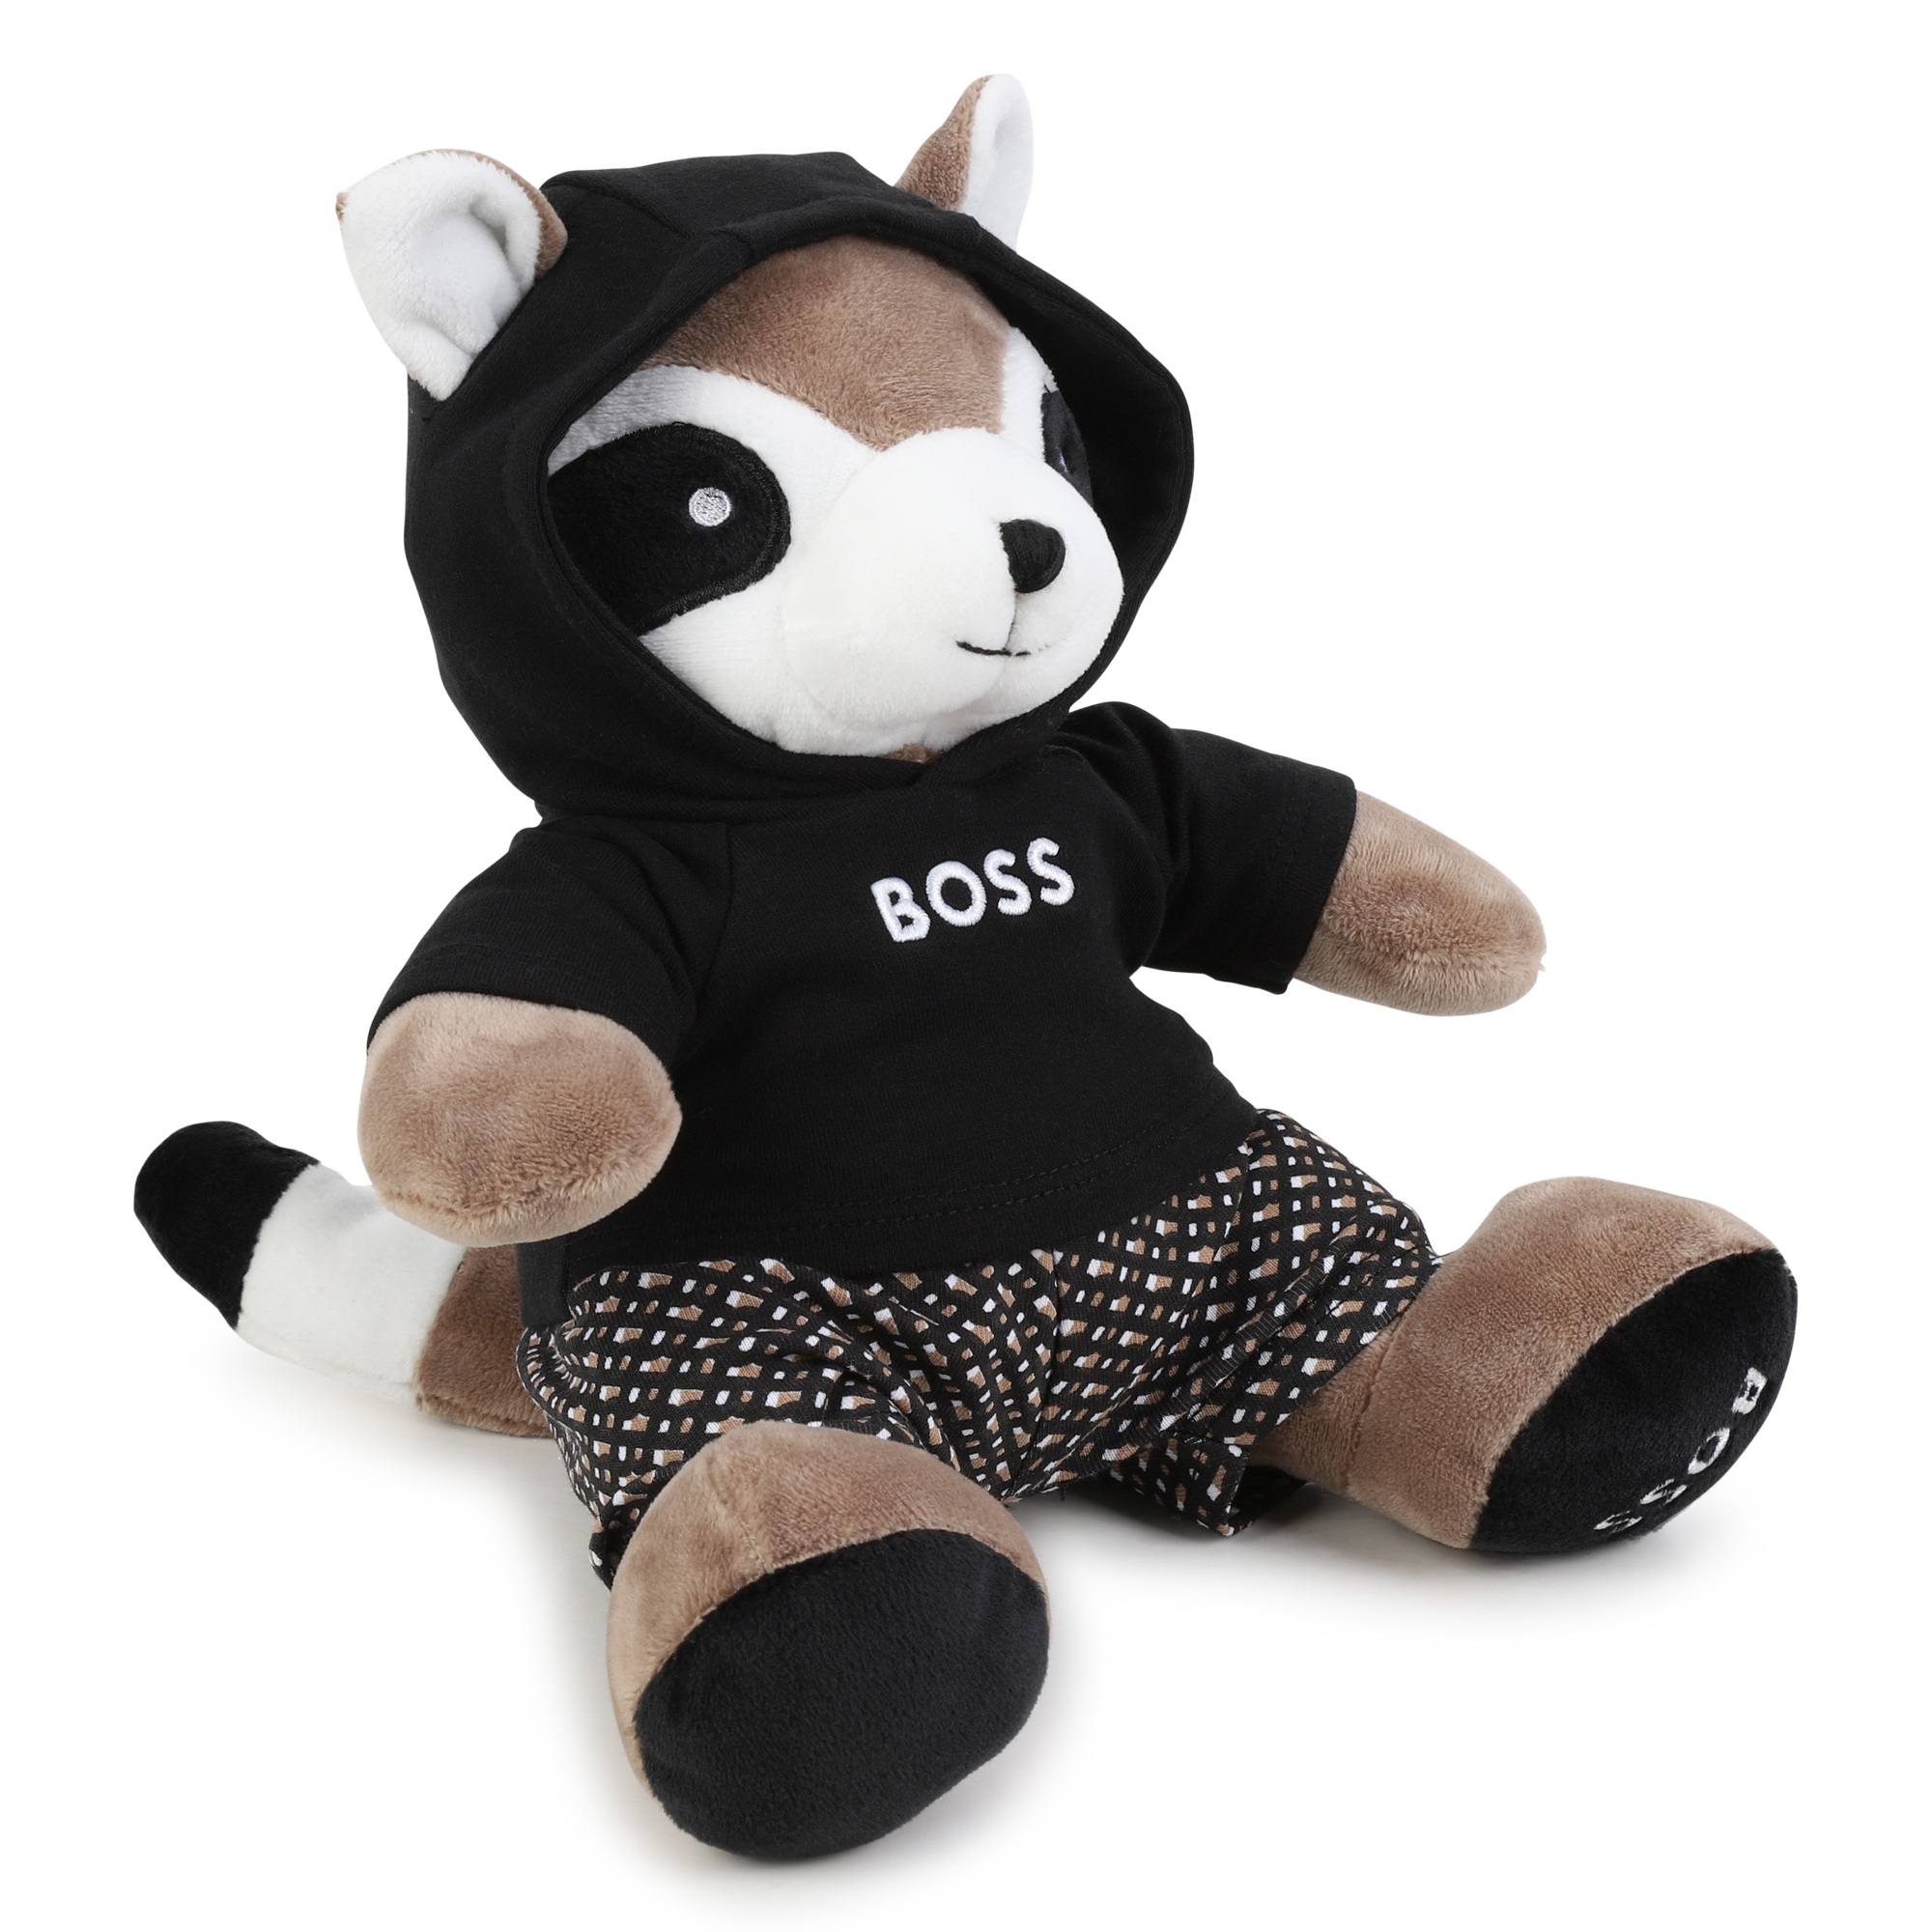 Red panda cuddly toy BOSS for BOY